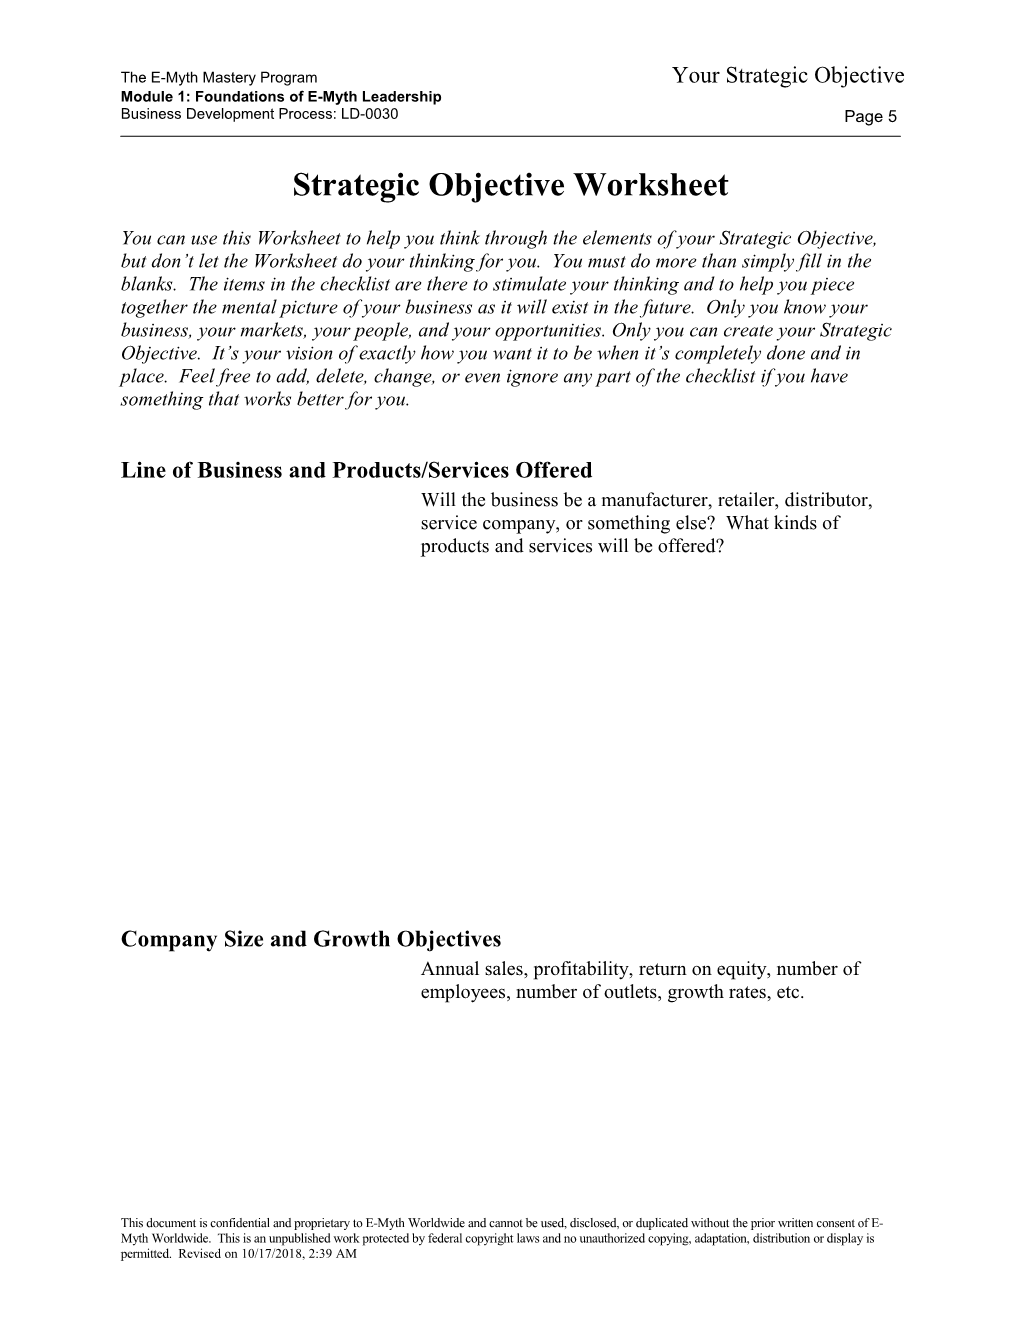 Your Strategic Objective